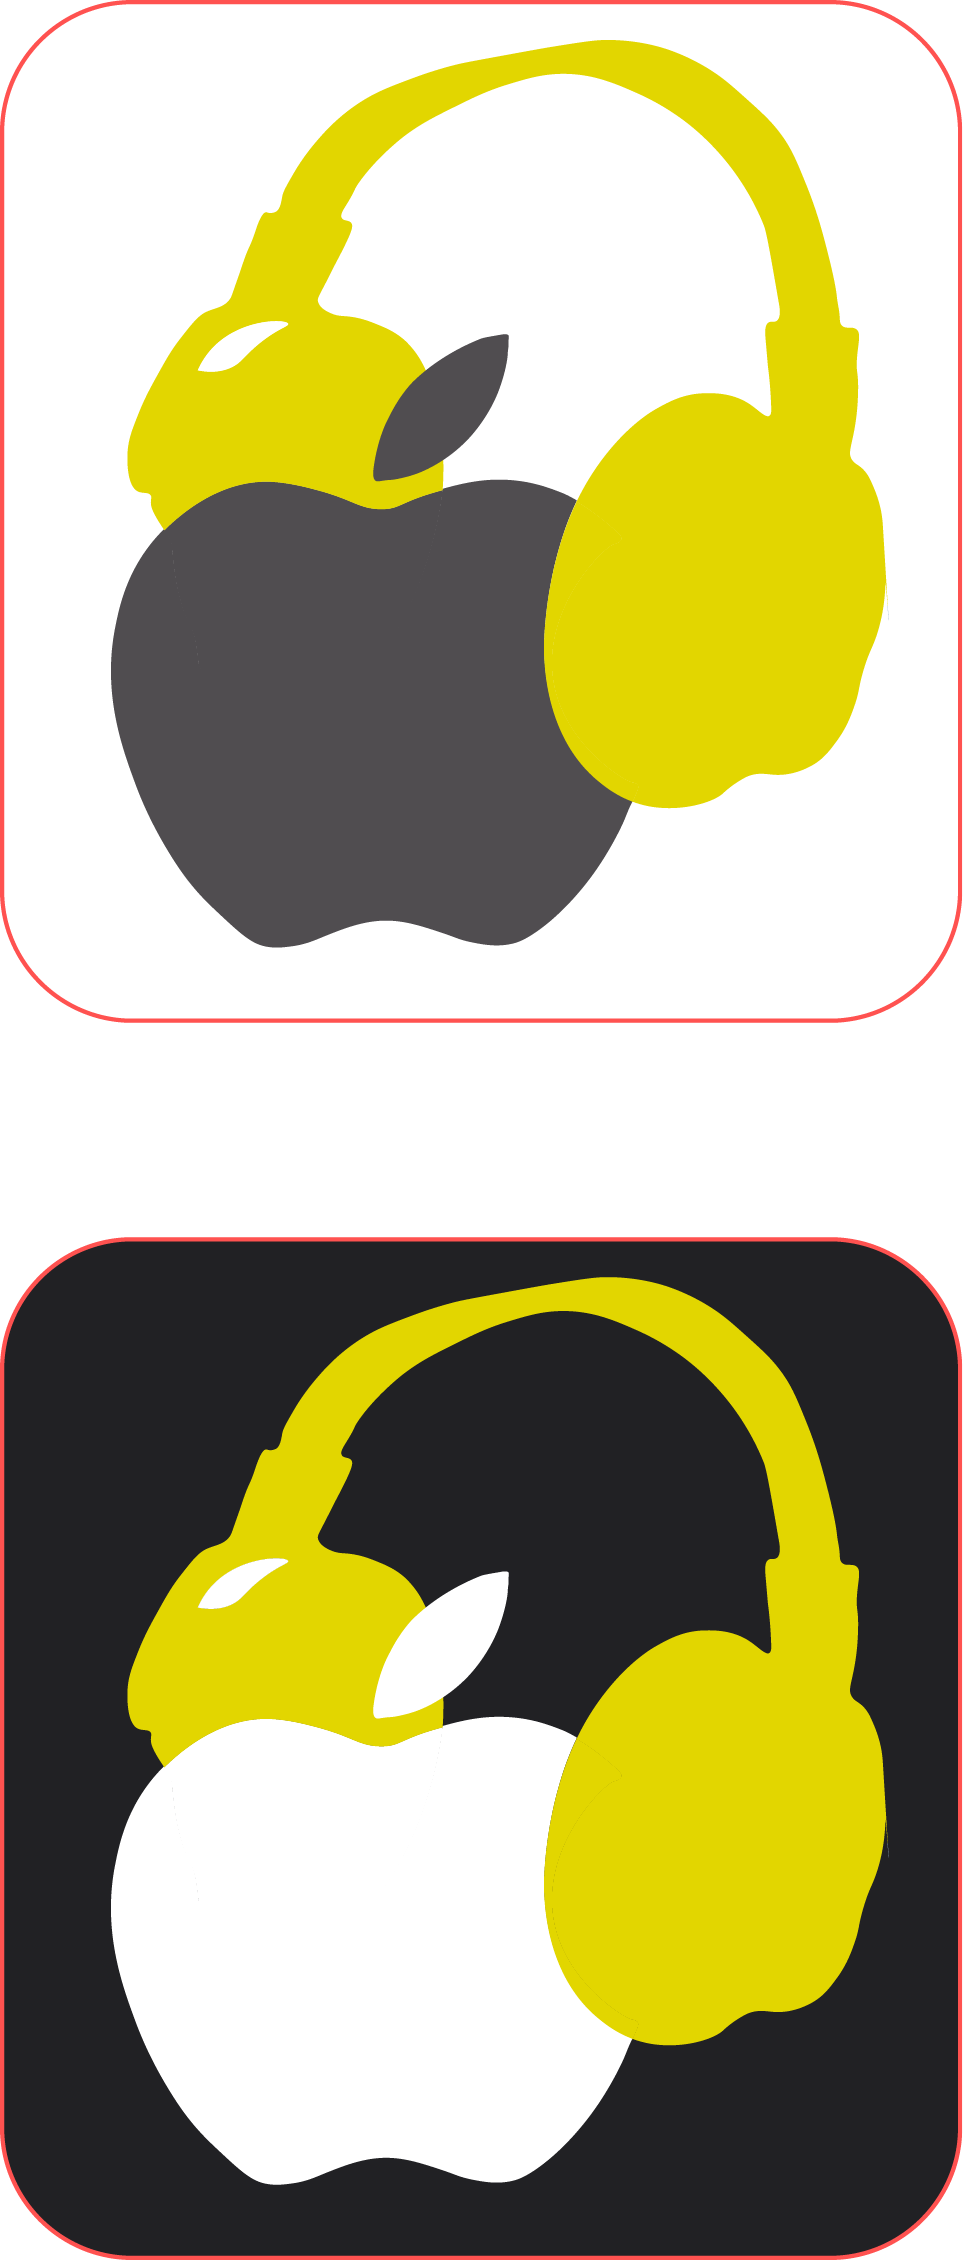 A redesign of Apple Music's logo that I made for JOUR 3380: Introduction to Digital Design.